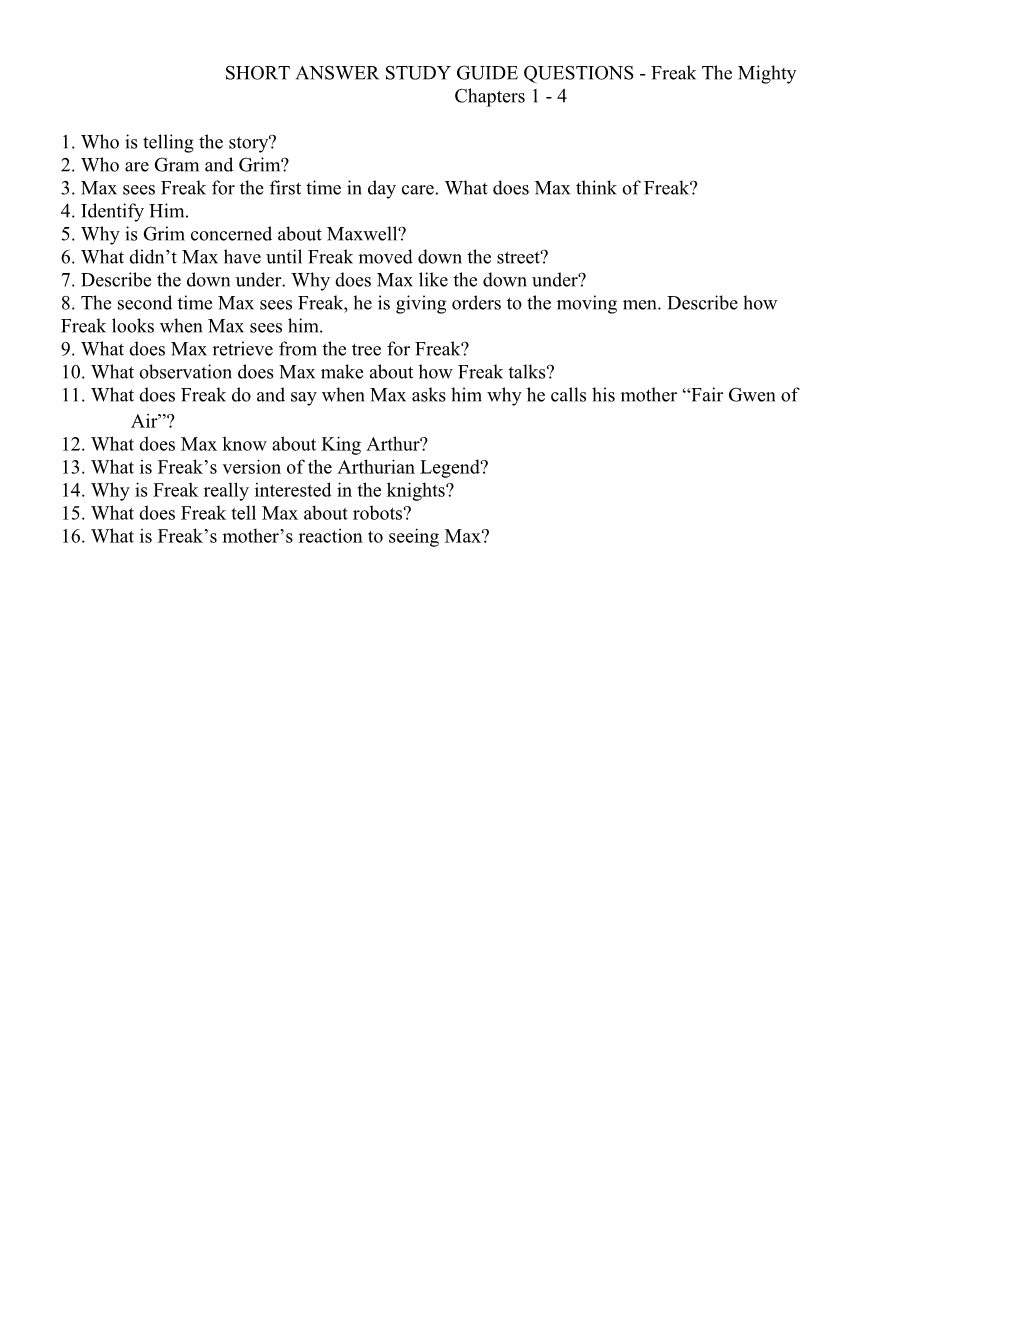 SHORT ANSWER STUDY GUIDE QUESTIONS - Freak the Mighty